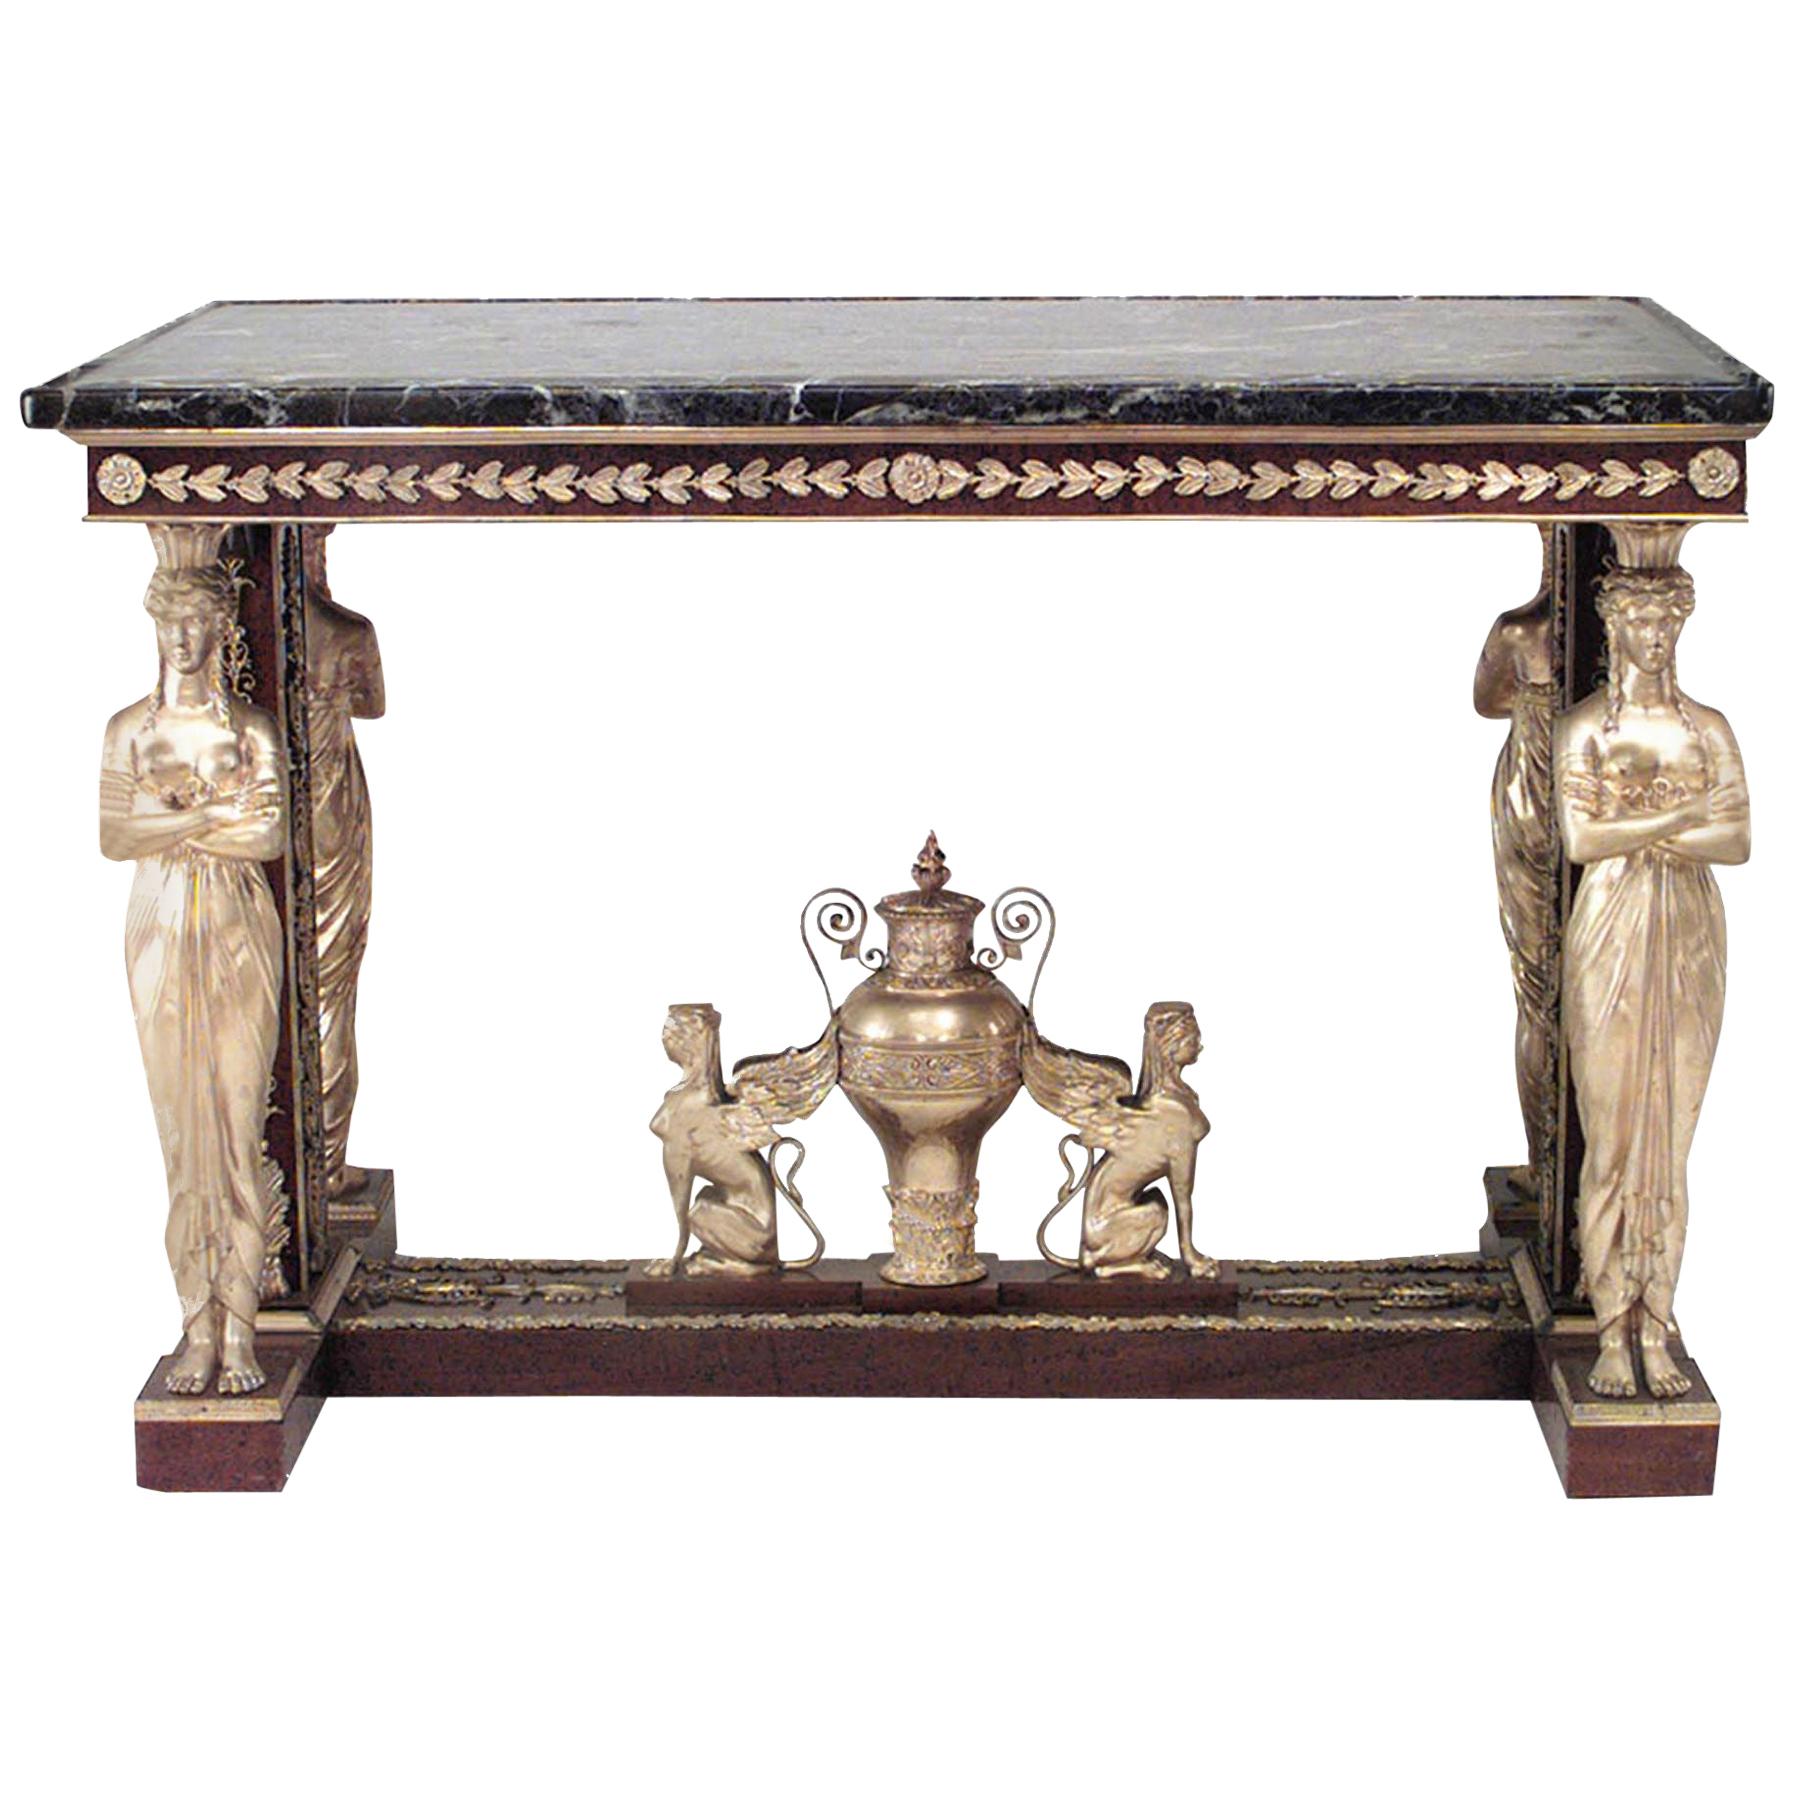 French Empire Revival Mahogany Center Table After Jacob-Desmalter